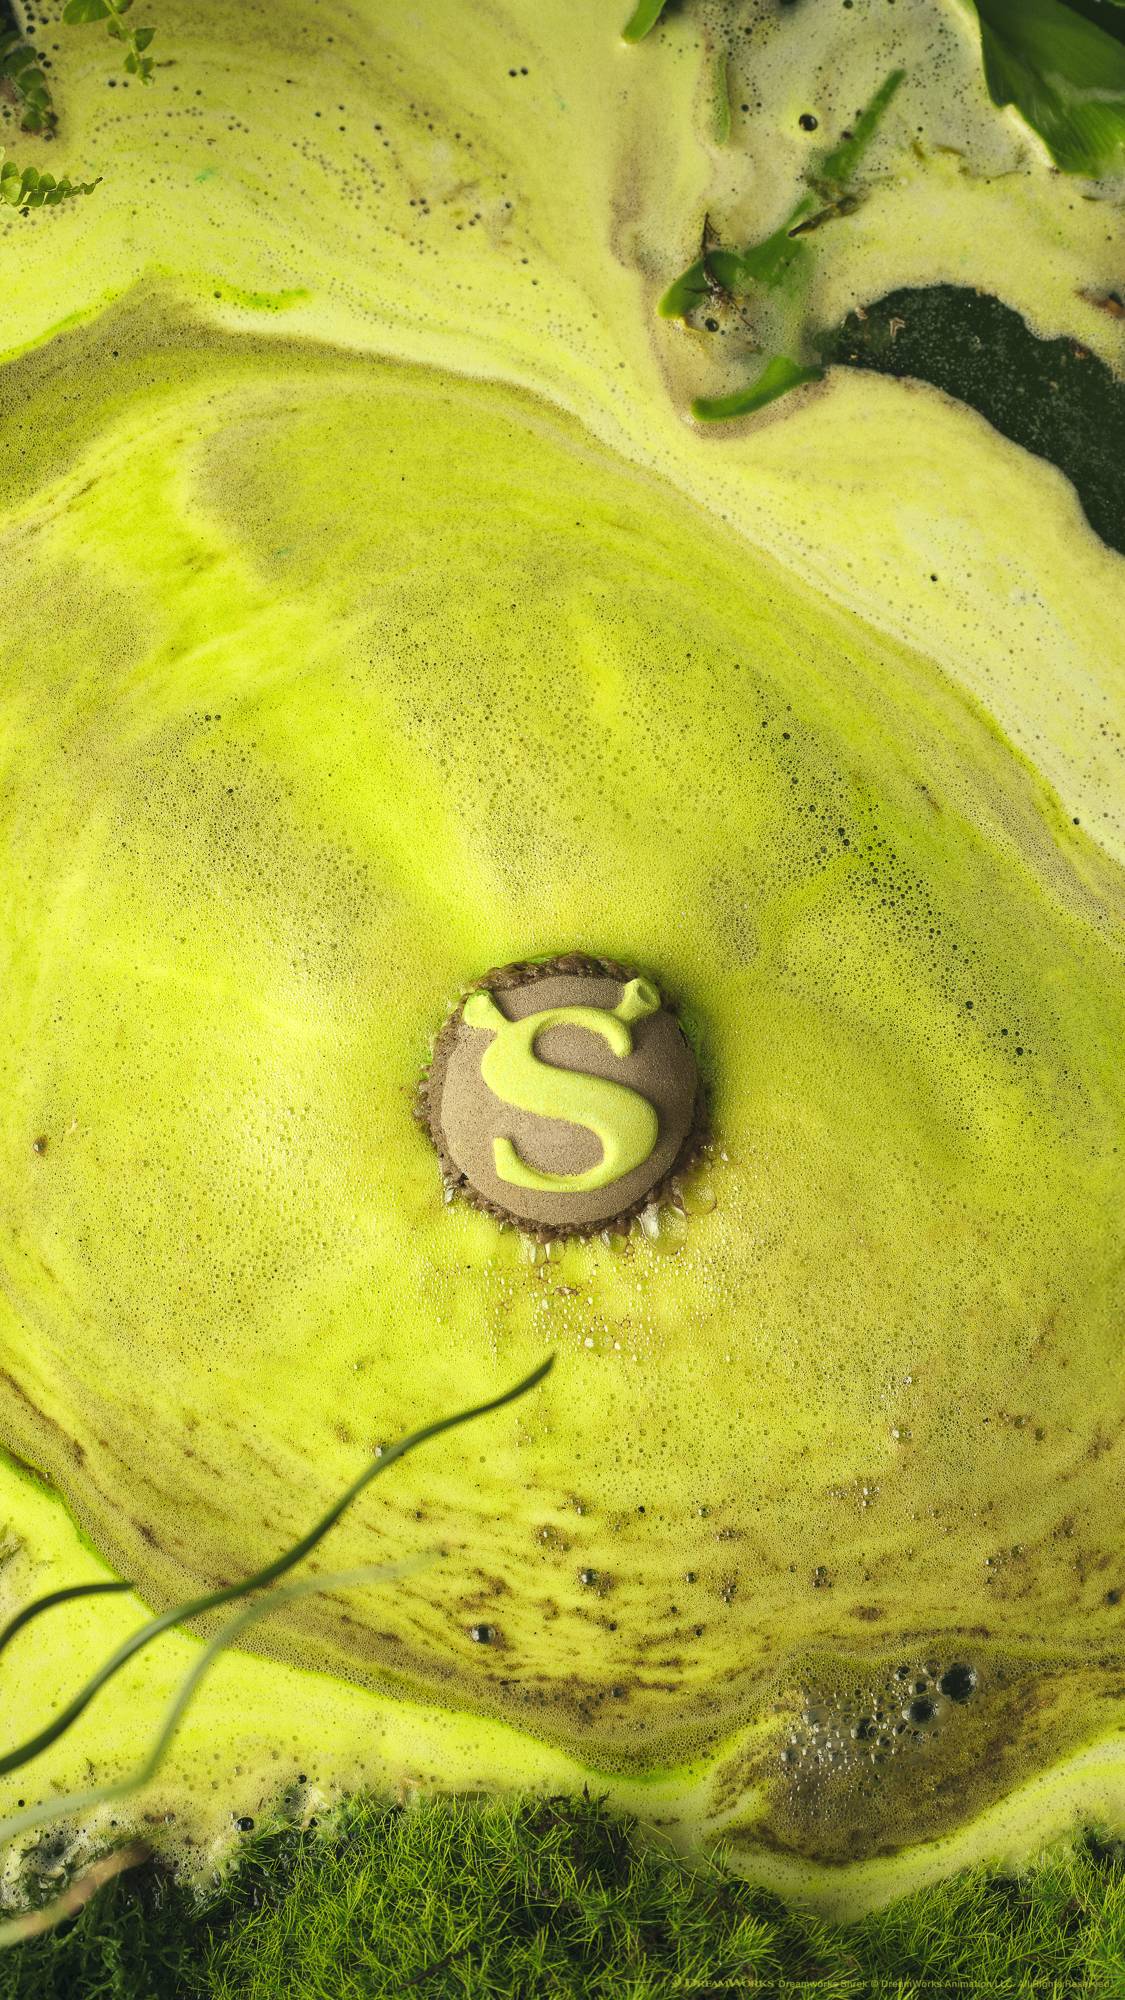 The Shrek Swamp bath bomb slowly dissolves on the water's surface releasing thick, velvety swirls of bright, lime-green foam with flecks of brown.